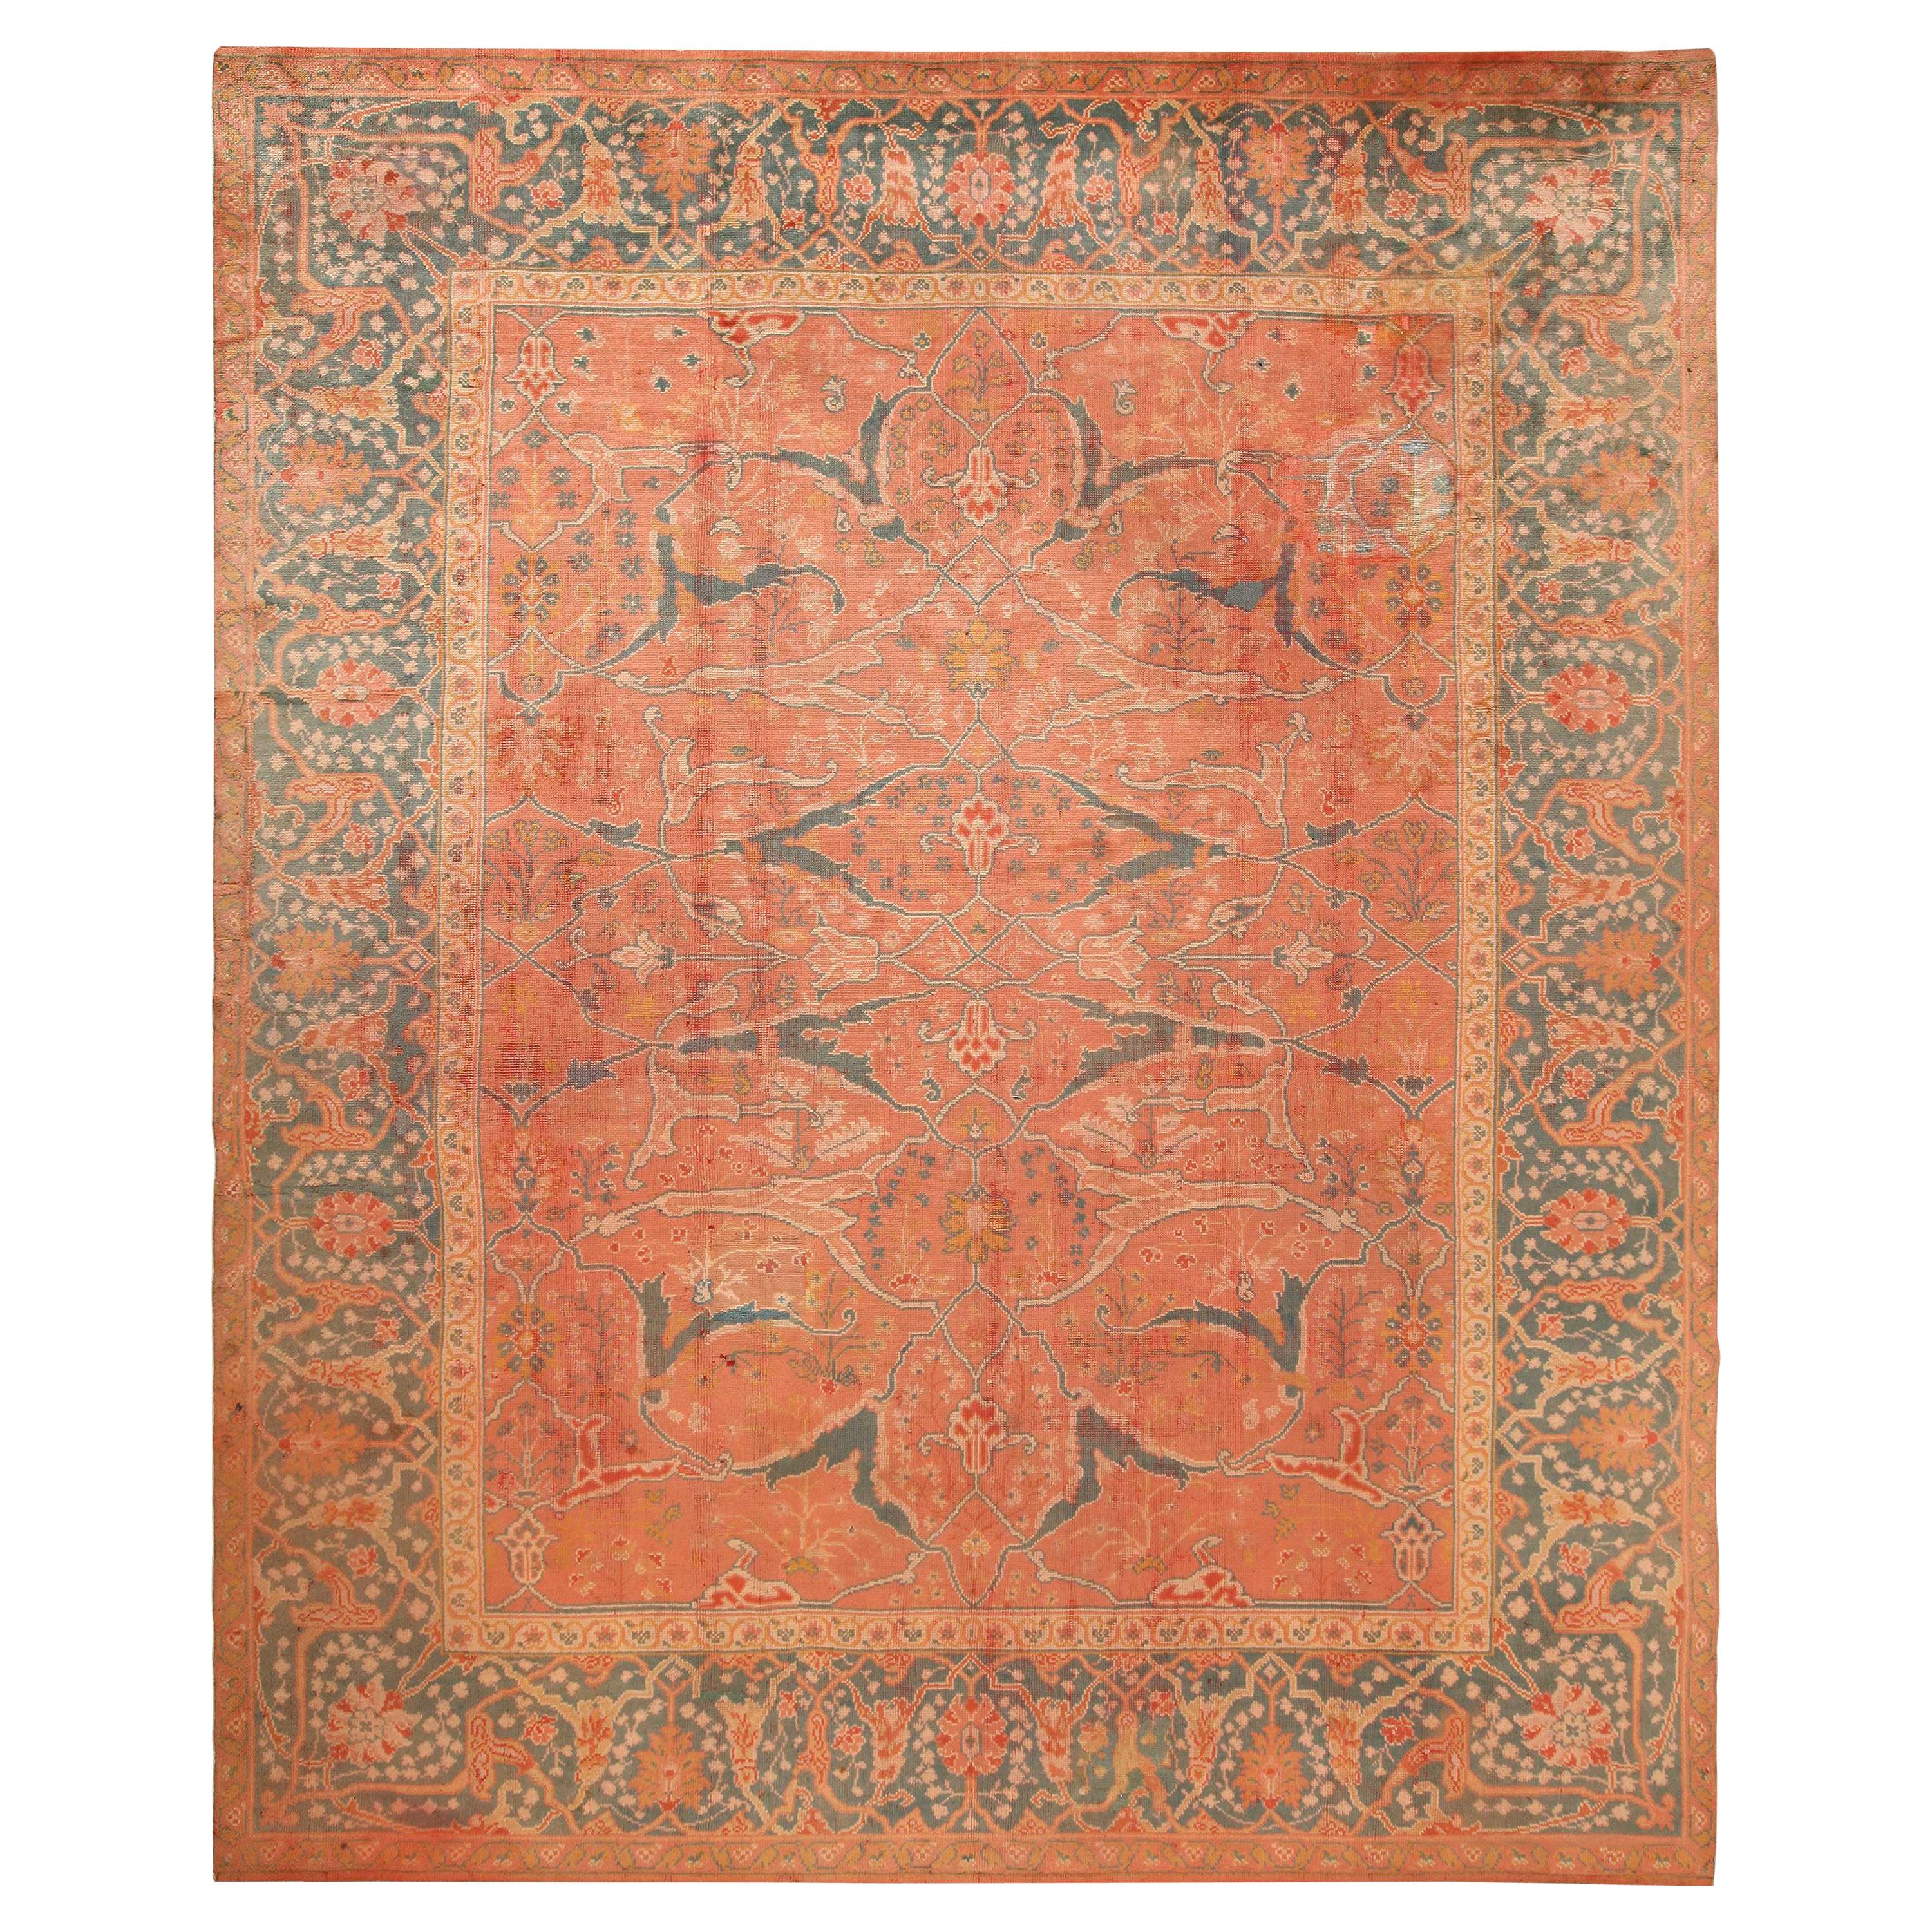 Beautiful Large Coral Color Antique Turkish Oushak Rug 12'9" x 16'" For Sale